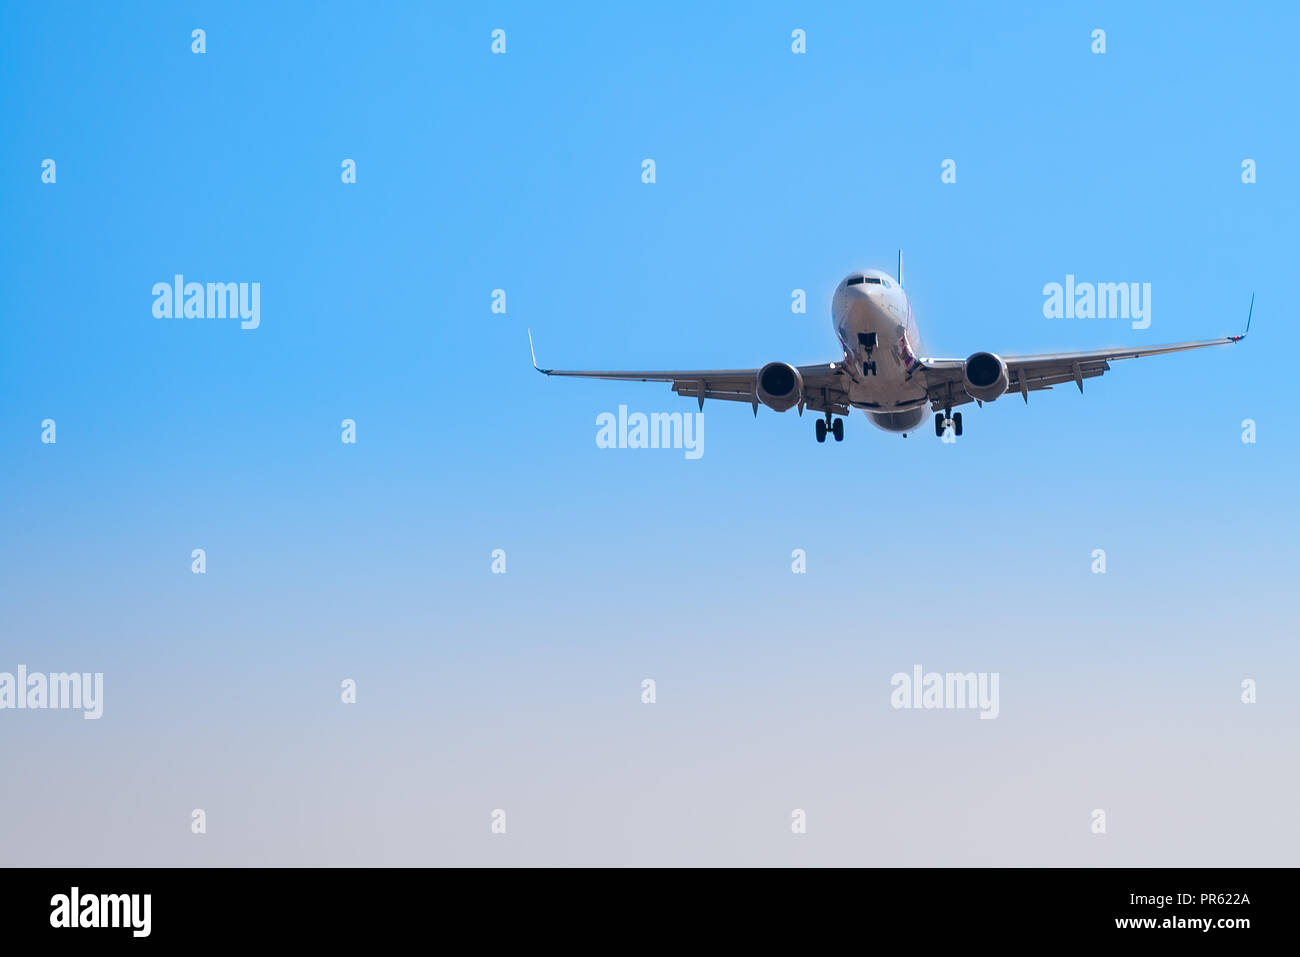 Close up view of an aircraft approaching the airport to land Stock Photo